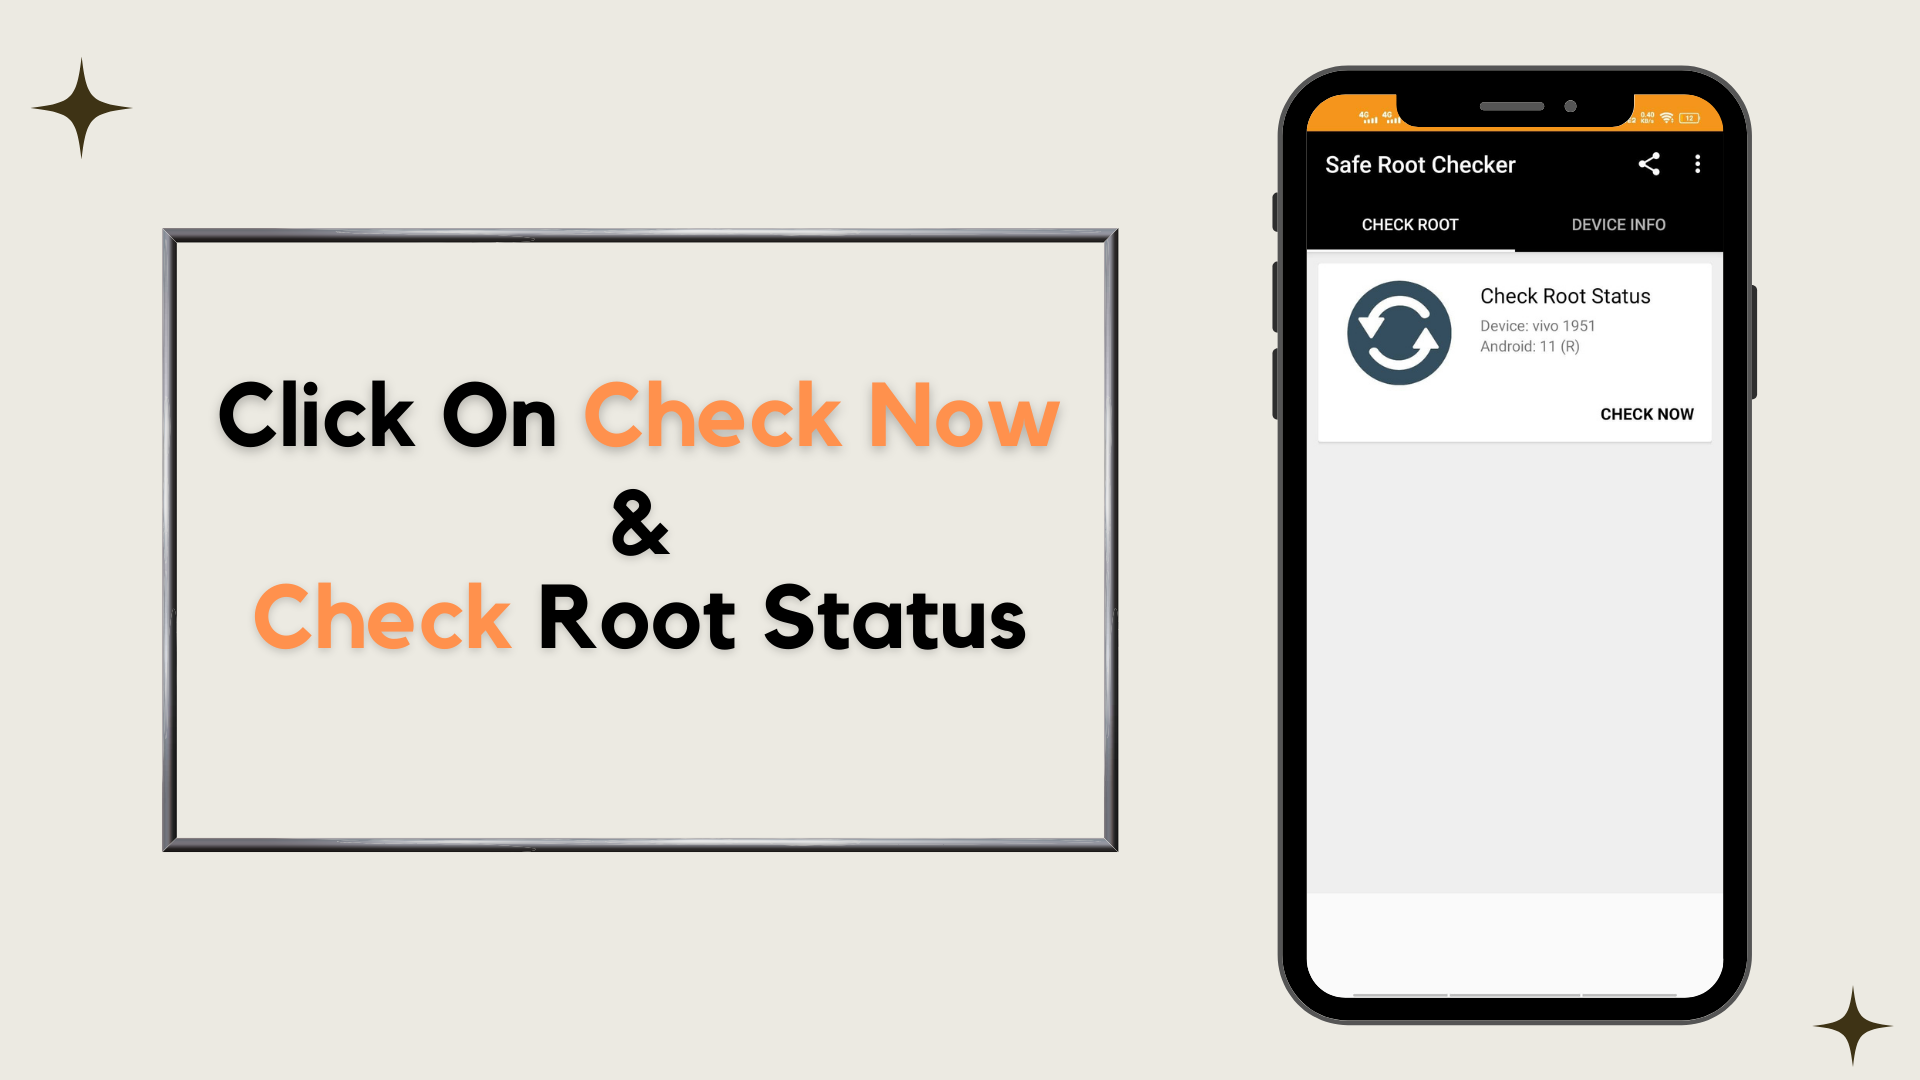 Safe Root Checker